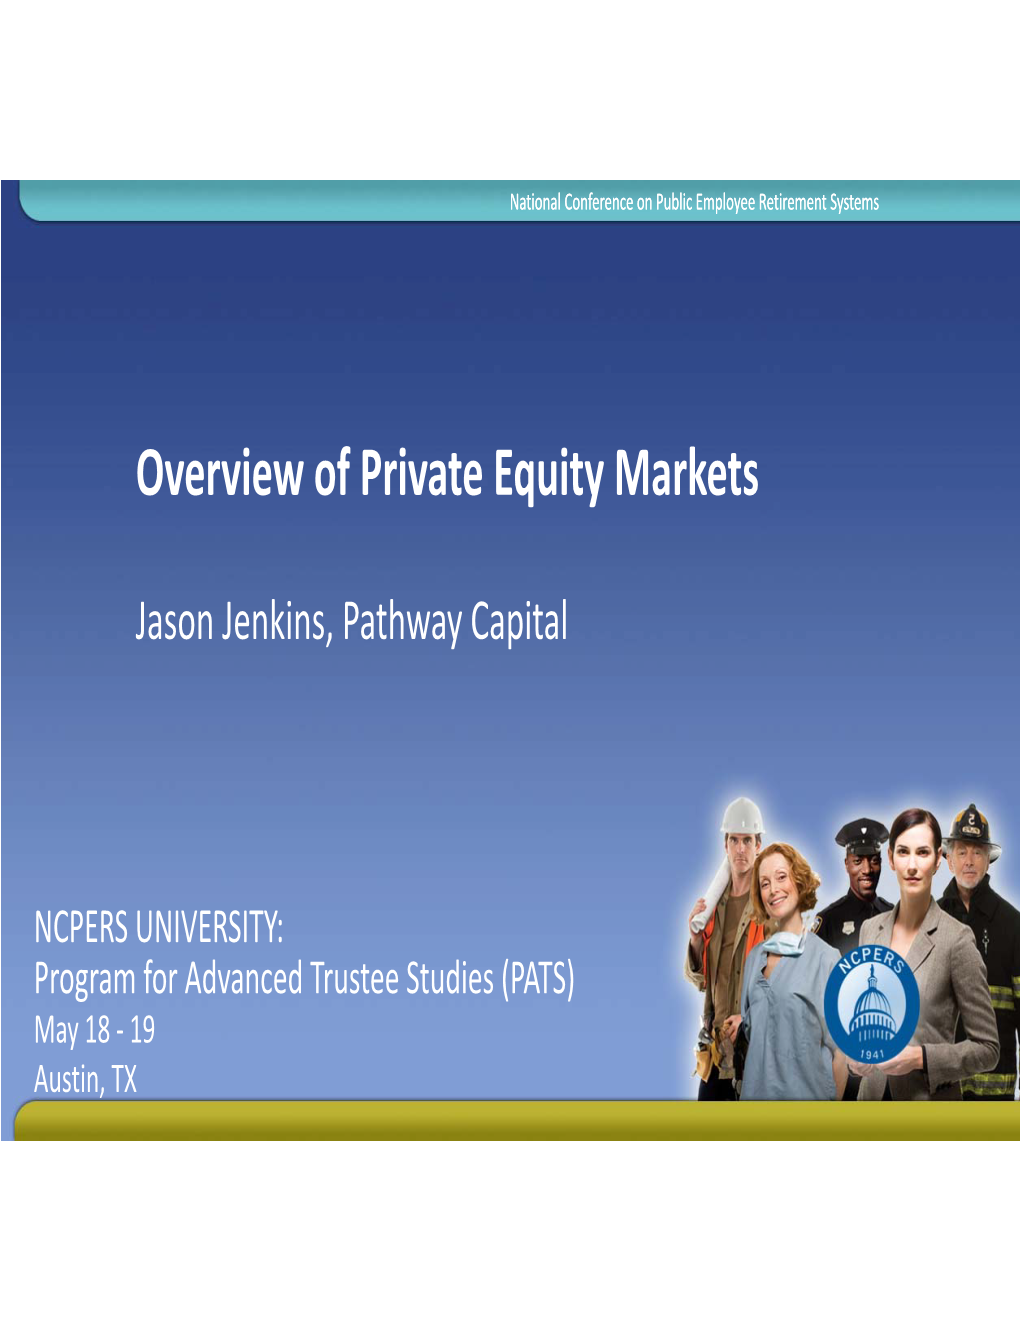 Overview of Private Equity Markets